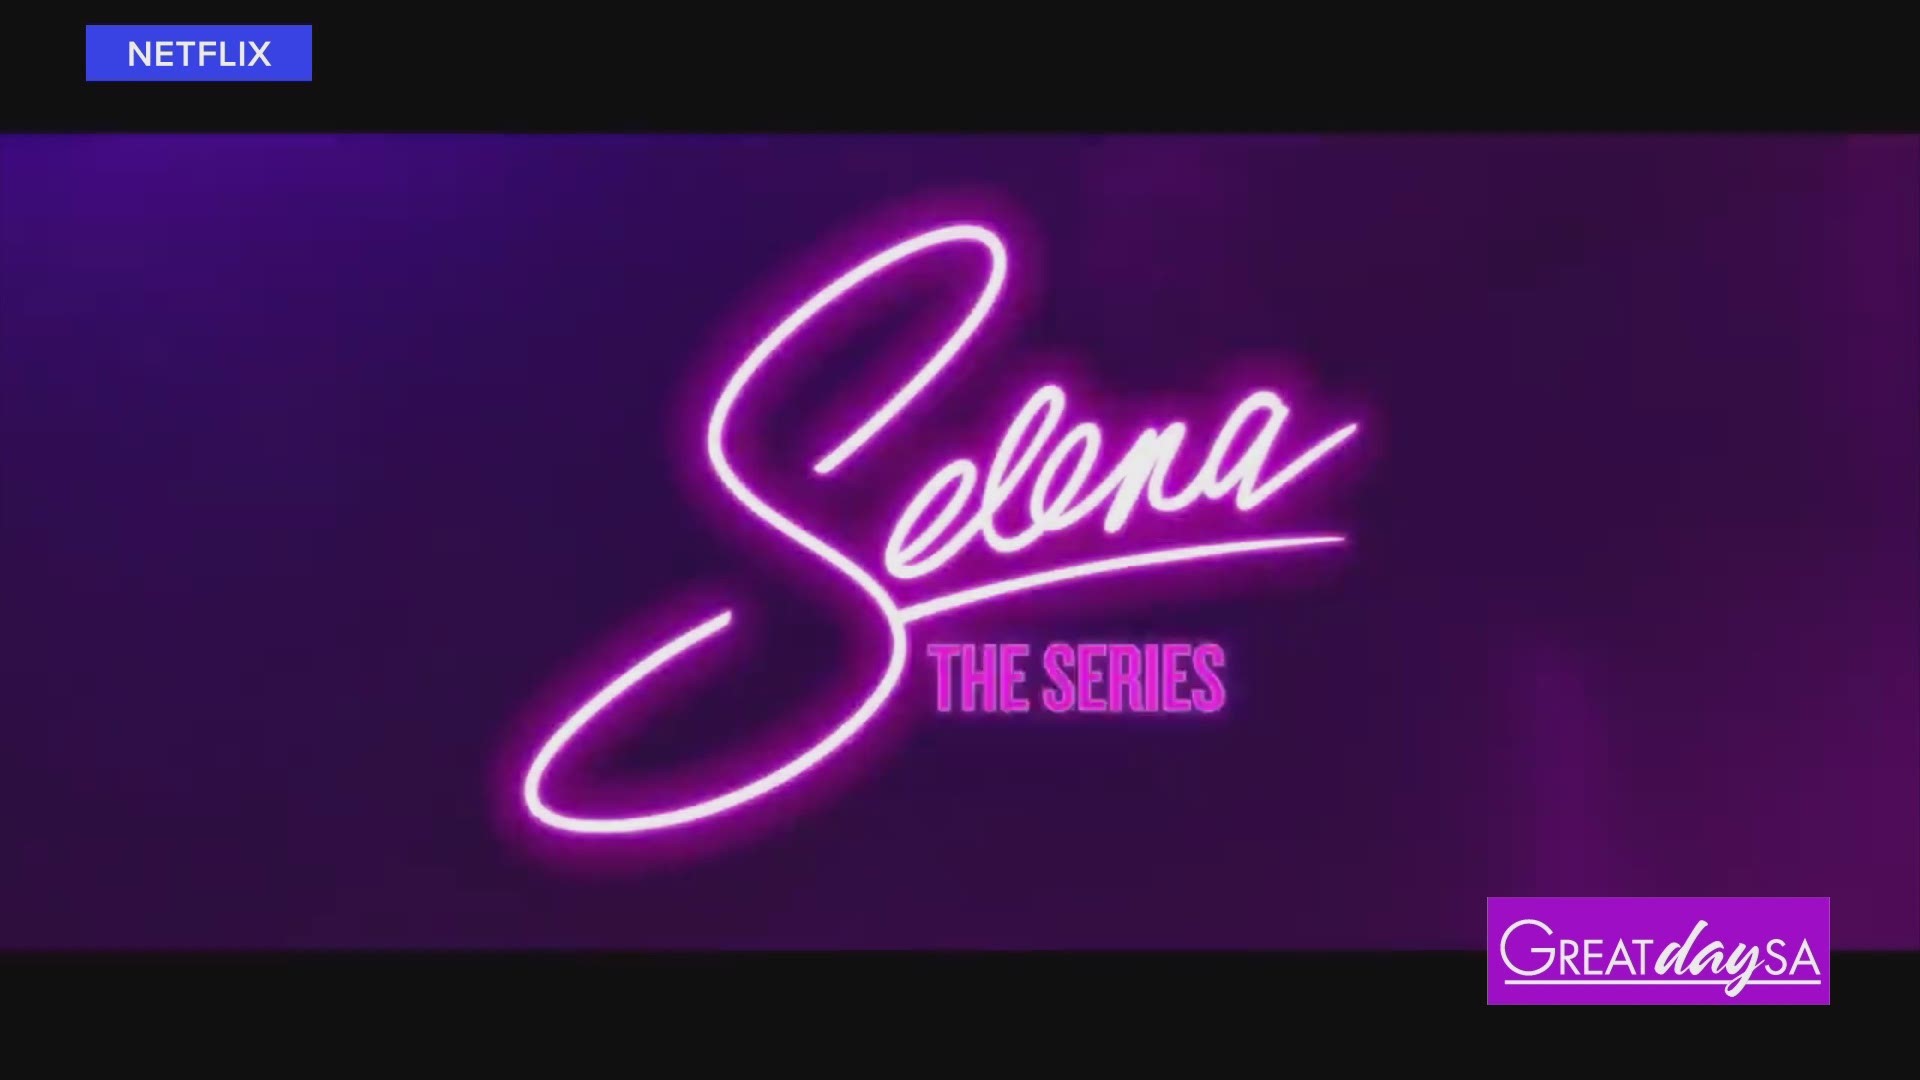 Eddie Van Halen passes away and Selena is getting a Netflix tribute that will air on Dec. 4th, 2020.